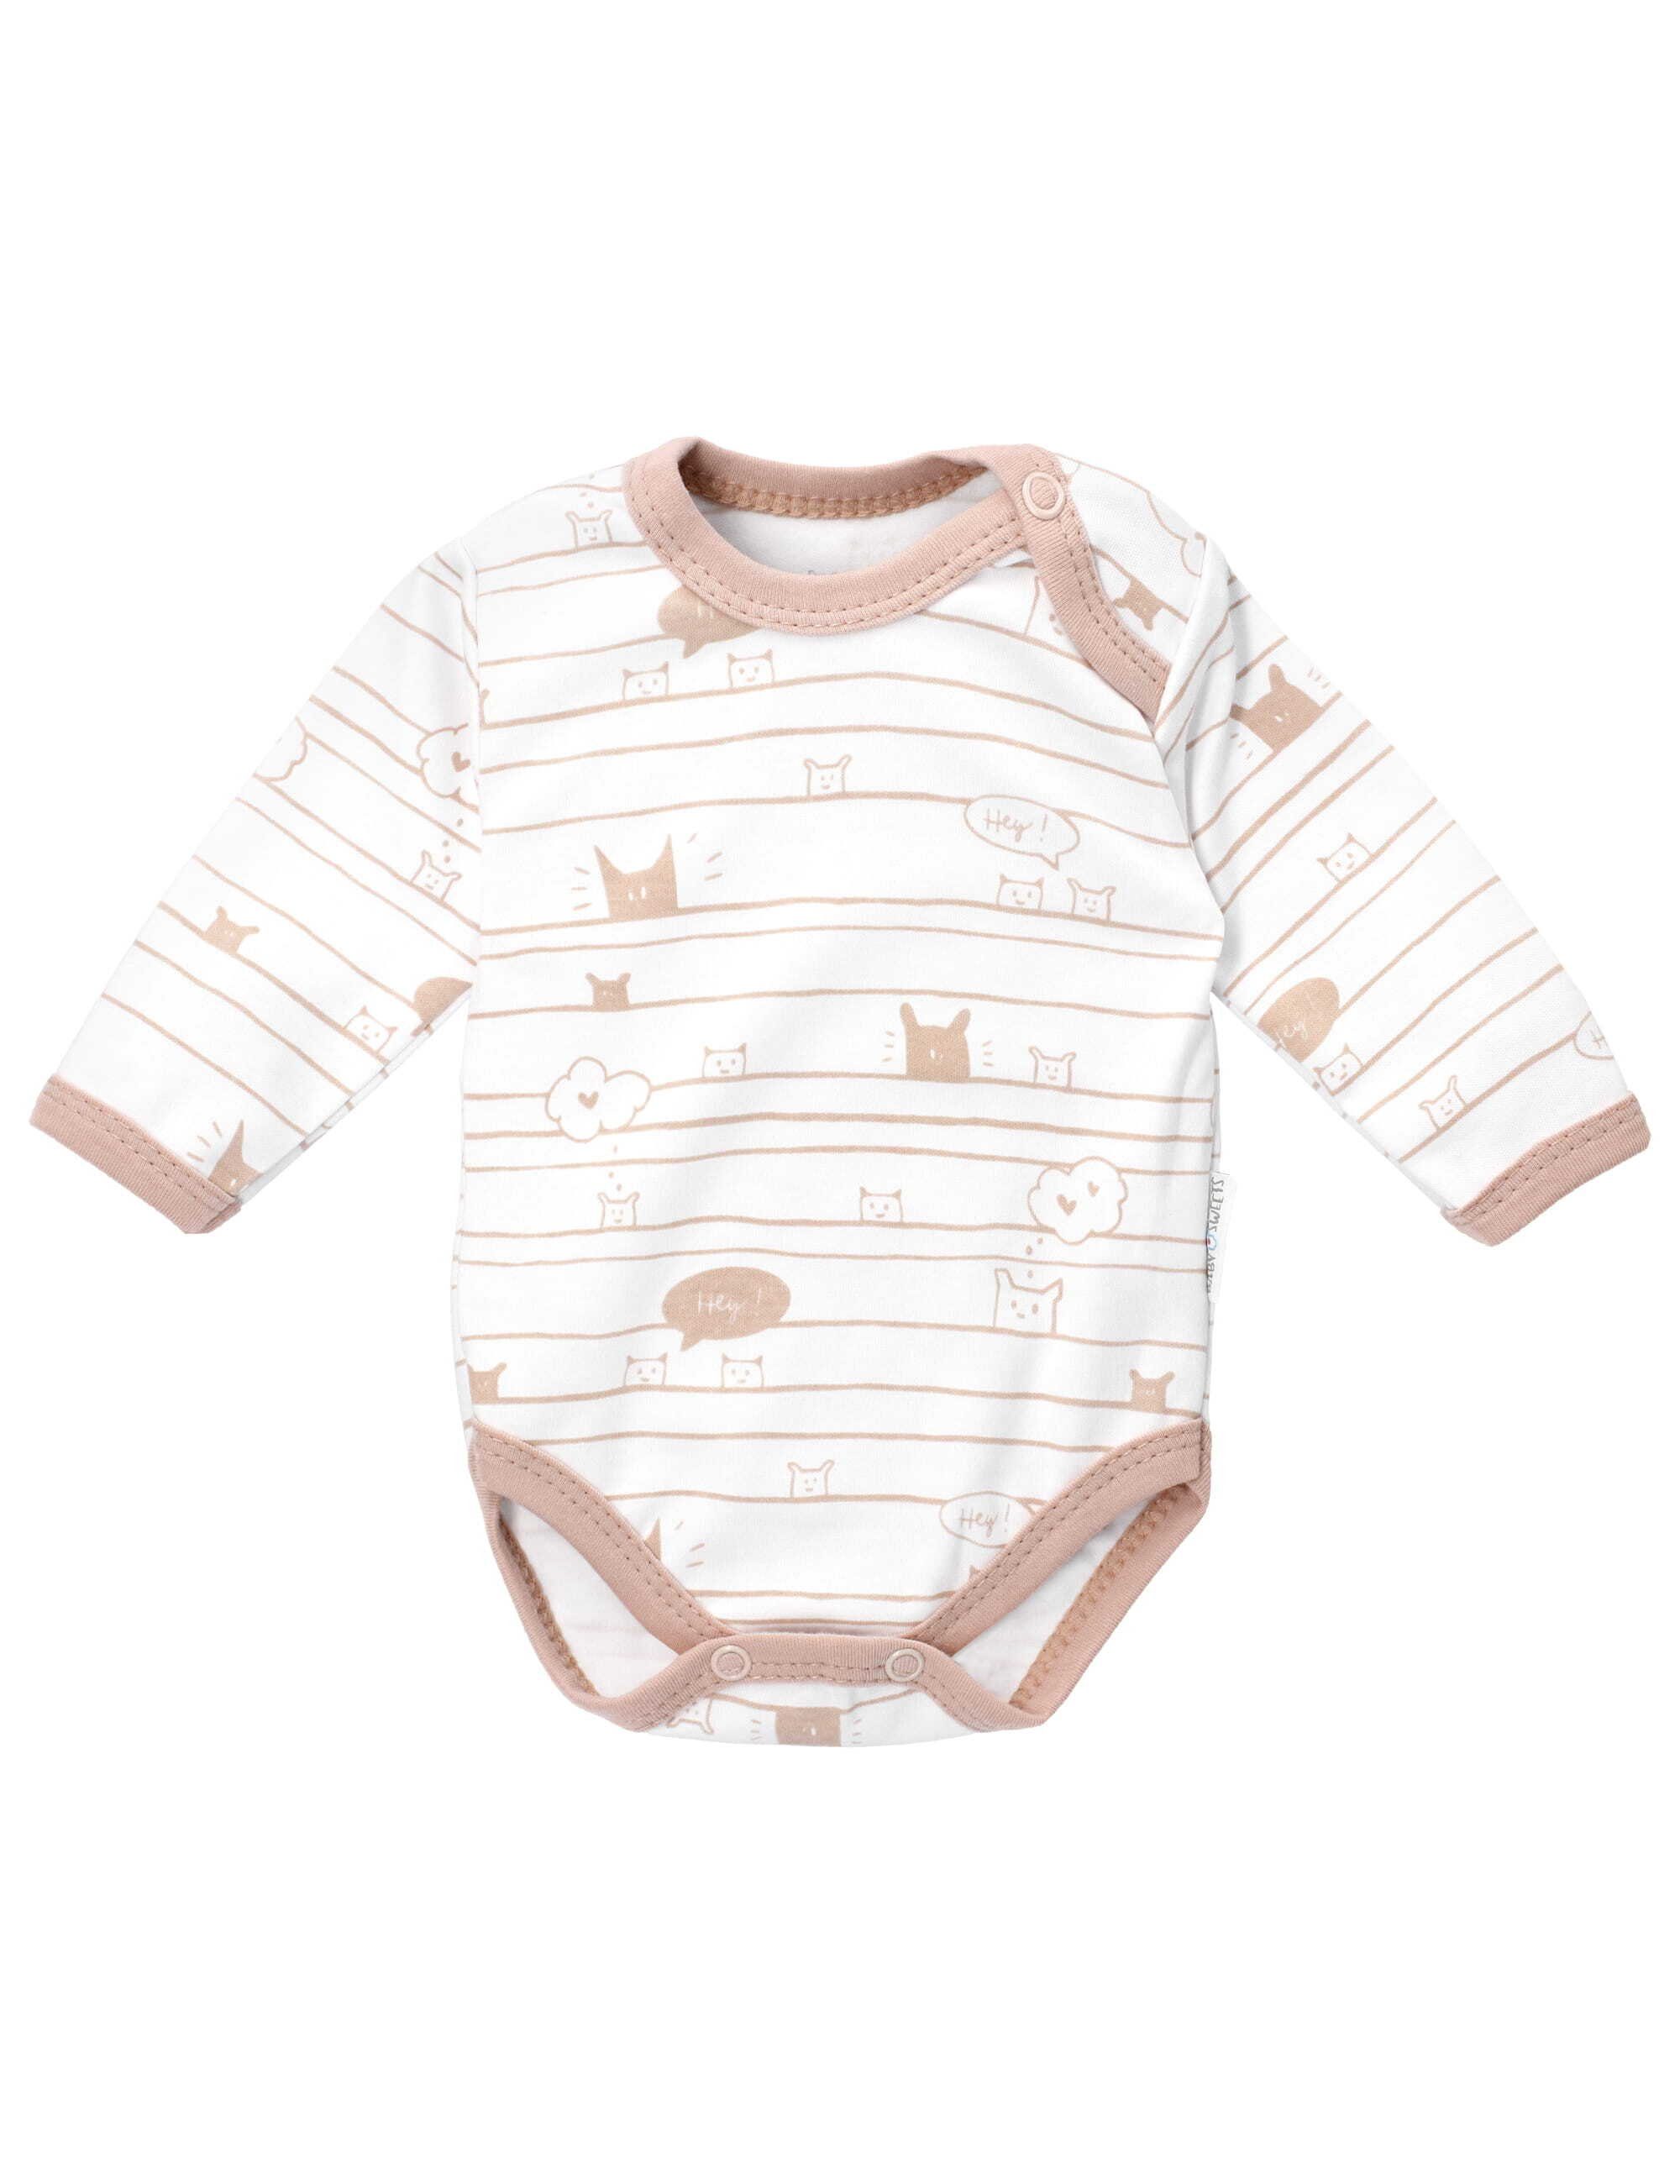 Sweets creme Set Hose beige Baby Body Tiere (3-tlg., & 3 Teile)